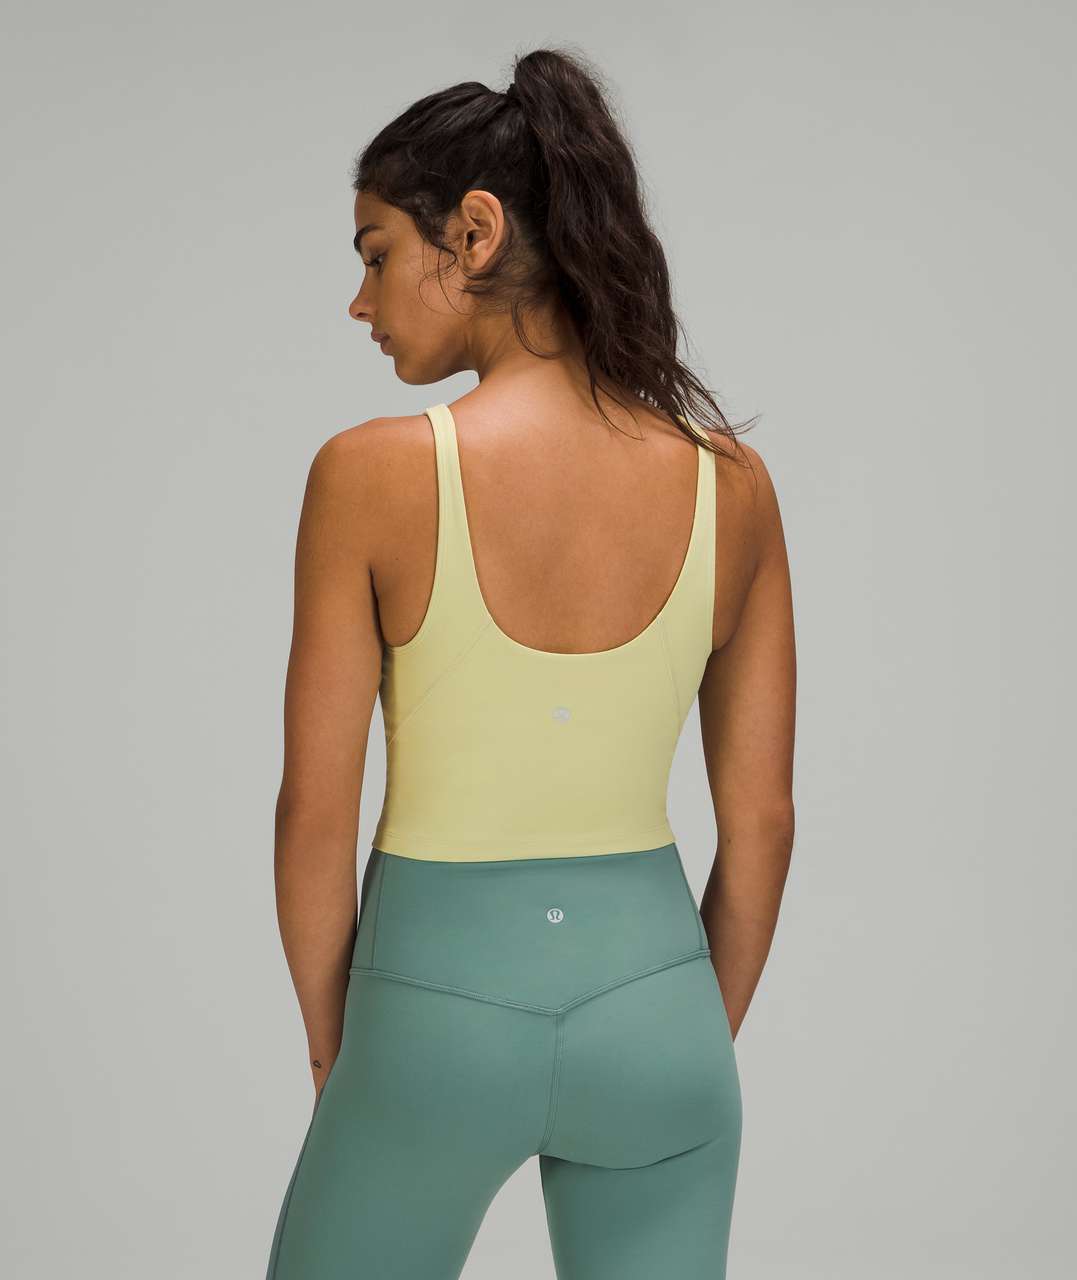 Sold thank you 🤍 Lululemon Align Tank (forest green) Size 10